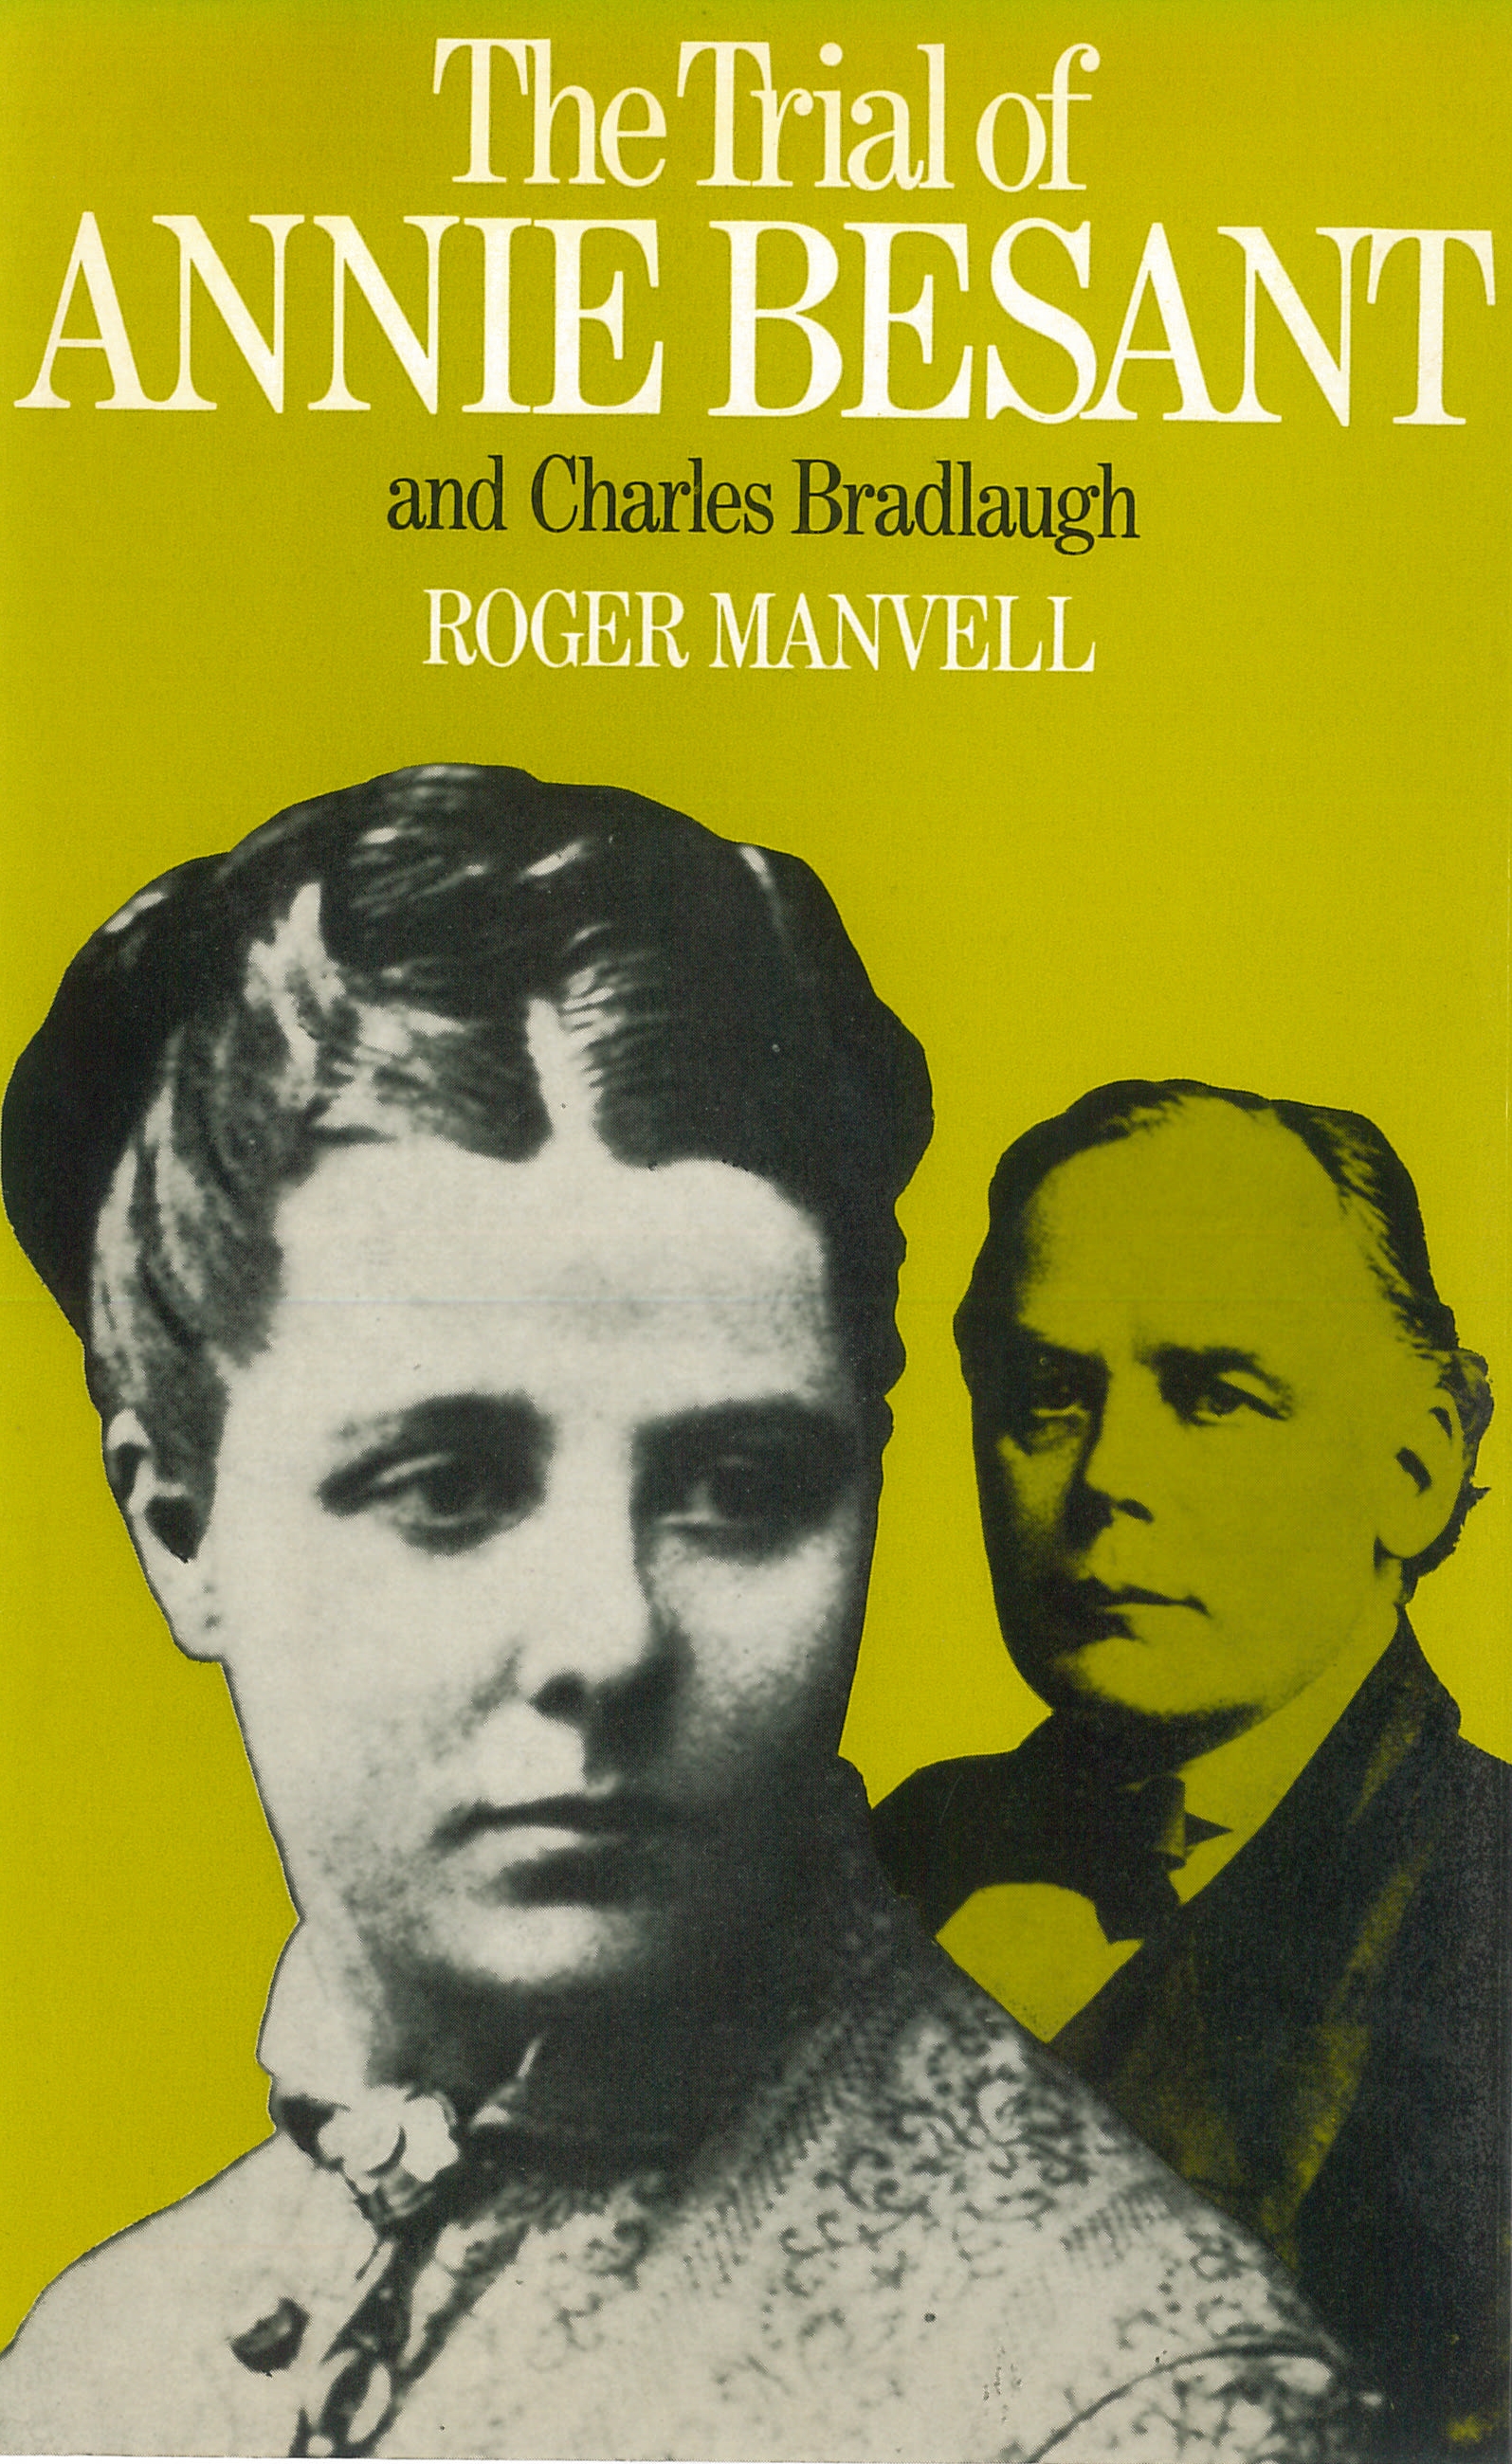 A book by Roger Manwell documented the trial of Besant and Bradlaugh